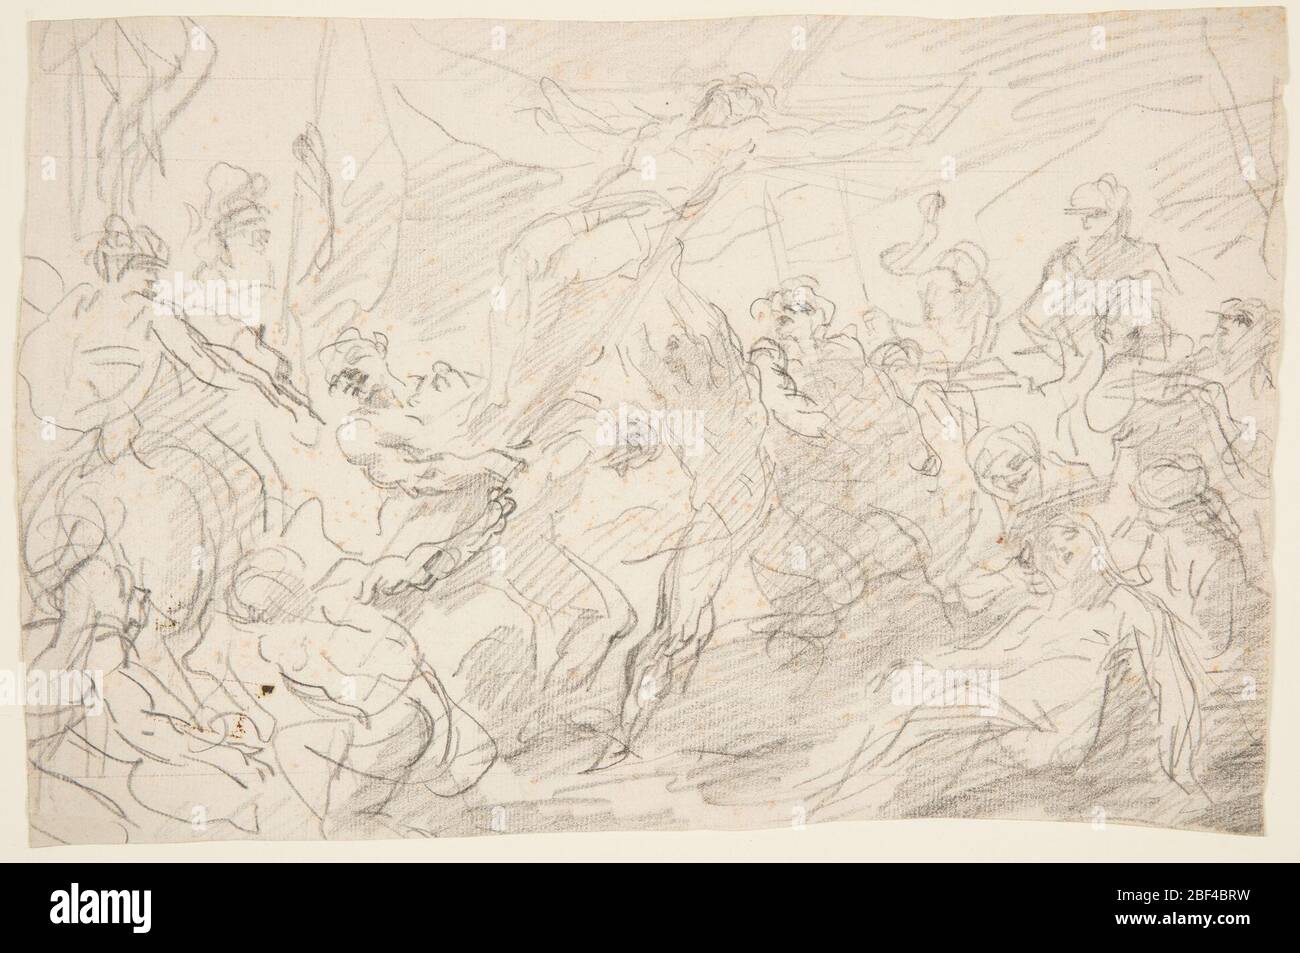 Study for the Elevation of the Cross. Loosely worked group of figures depicting the elevation of Jesus, at center, on the cross. Virgin Mary seated at right. Semi-nude figure of a man at center supports the cross from beneath. Stock Photo